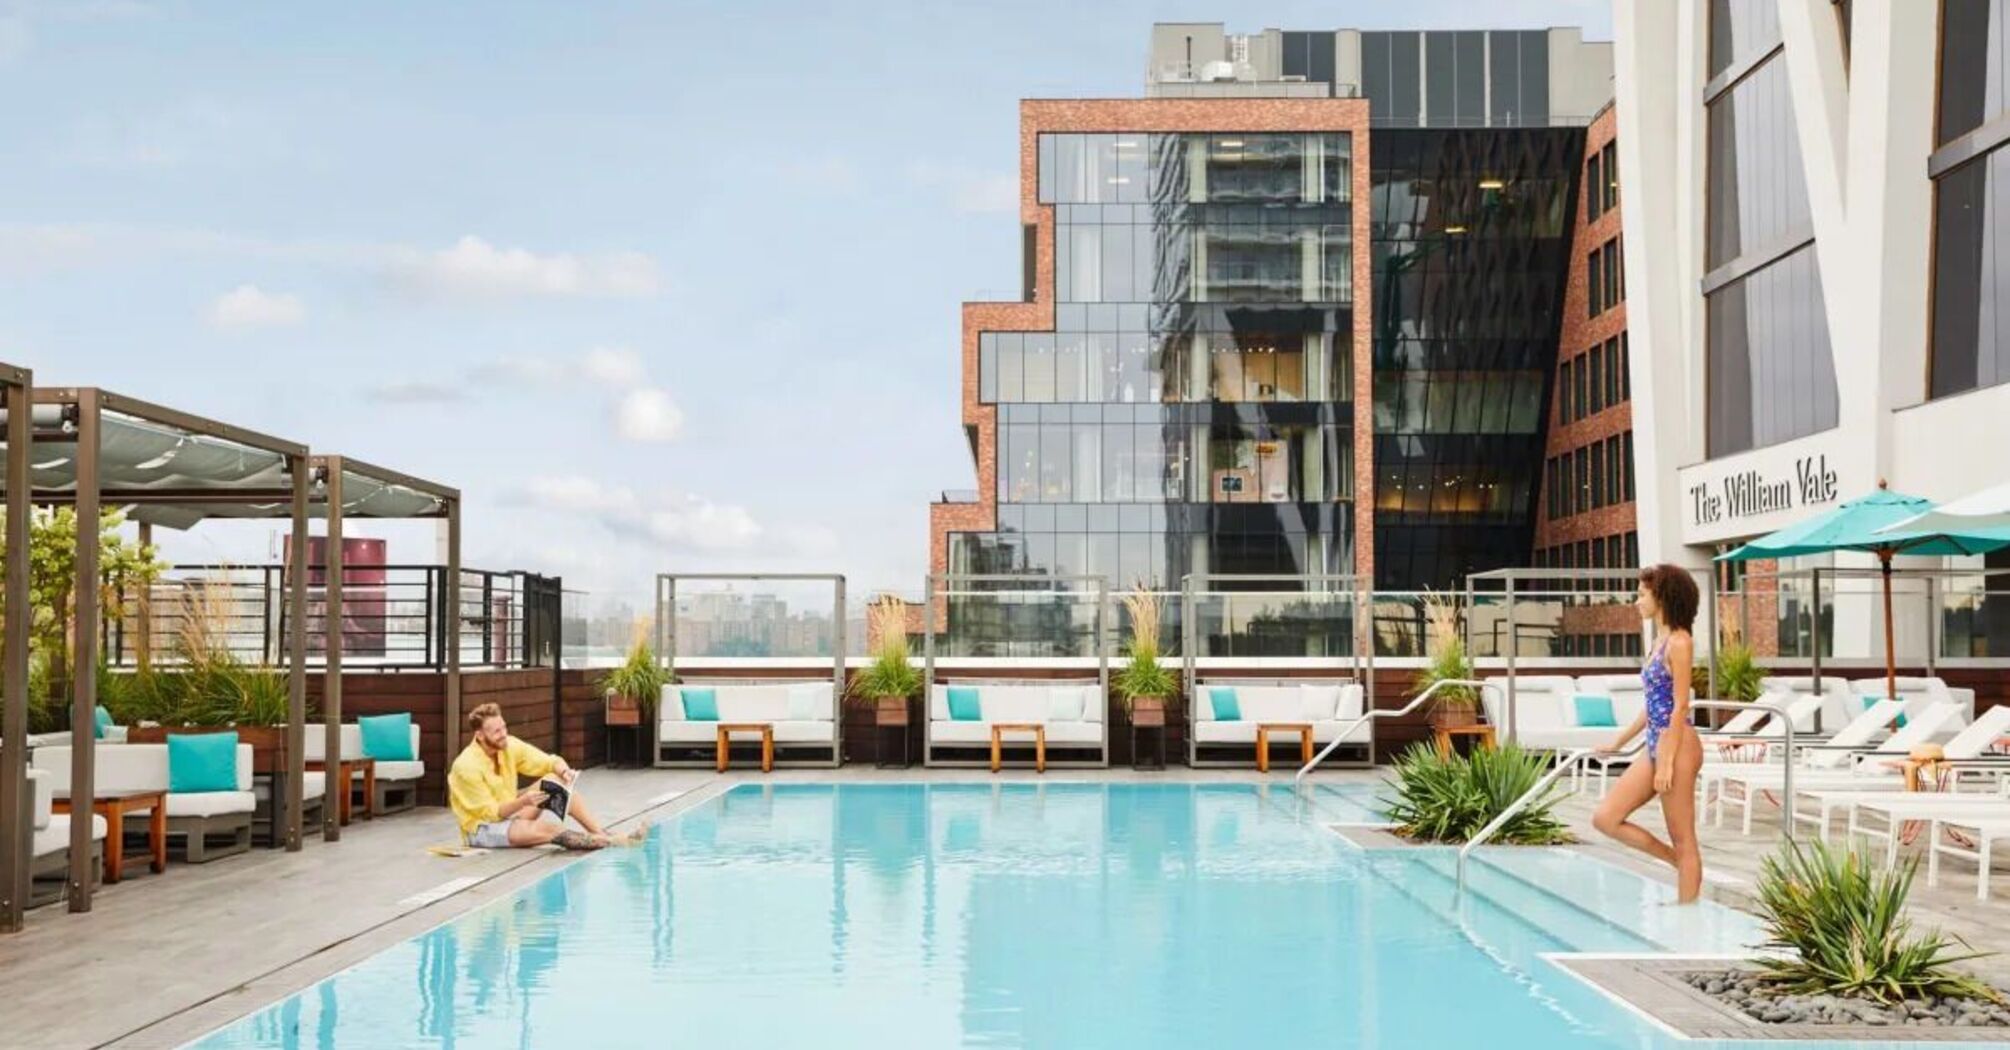 Top NYC hotels with gorgeous rooftop pools: 8 perfect places to relax in the heat by the water with drinks and stunning views